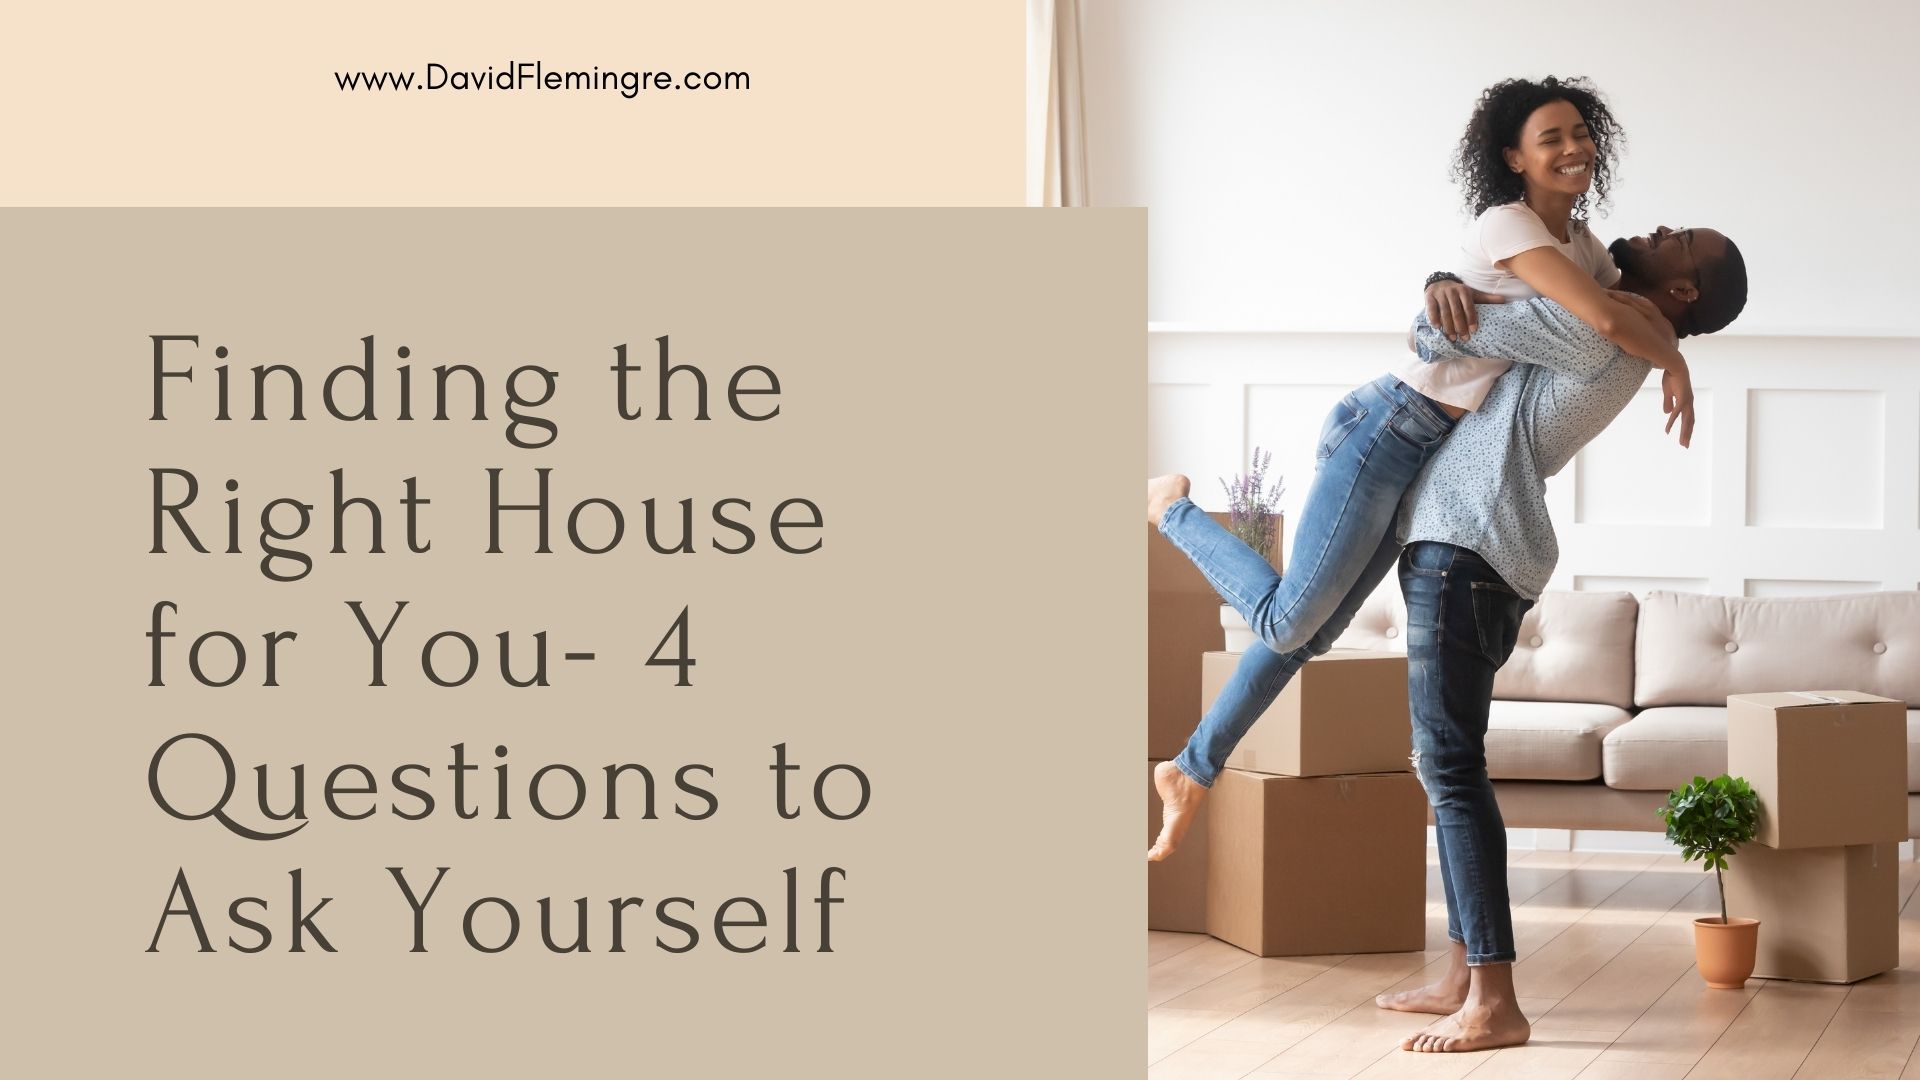 Finding the Right House for You- 4 Questions to Ask Yourself